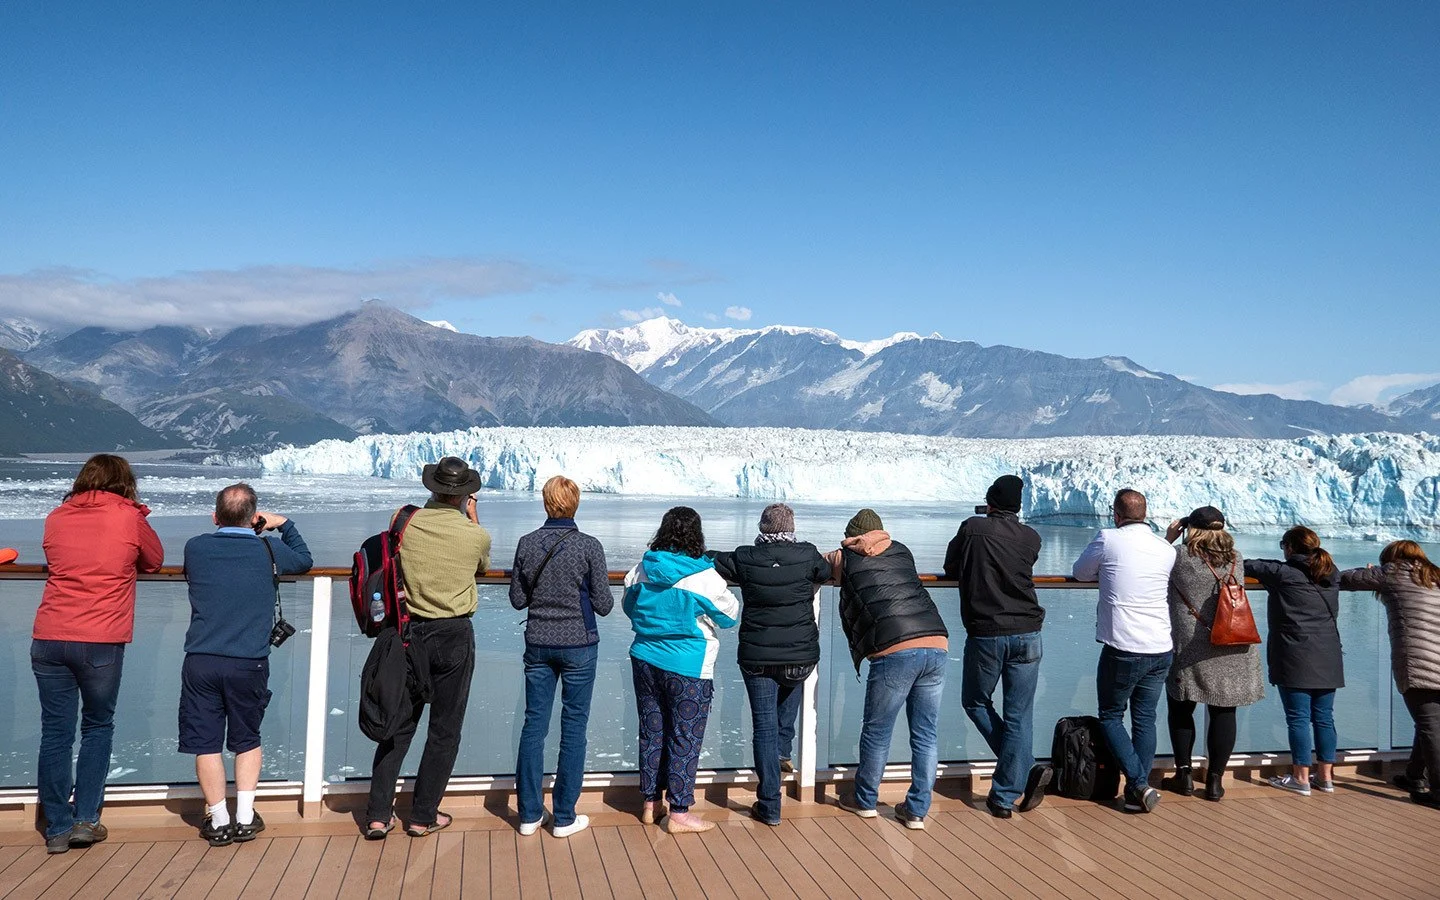 Cruise ship passengers on deck at the Hubbard Glacier